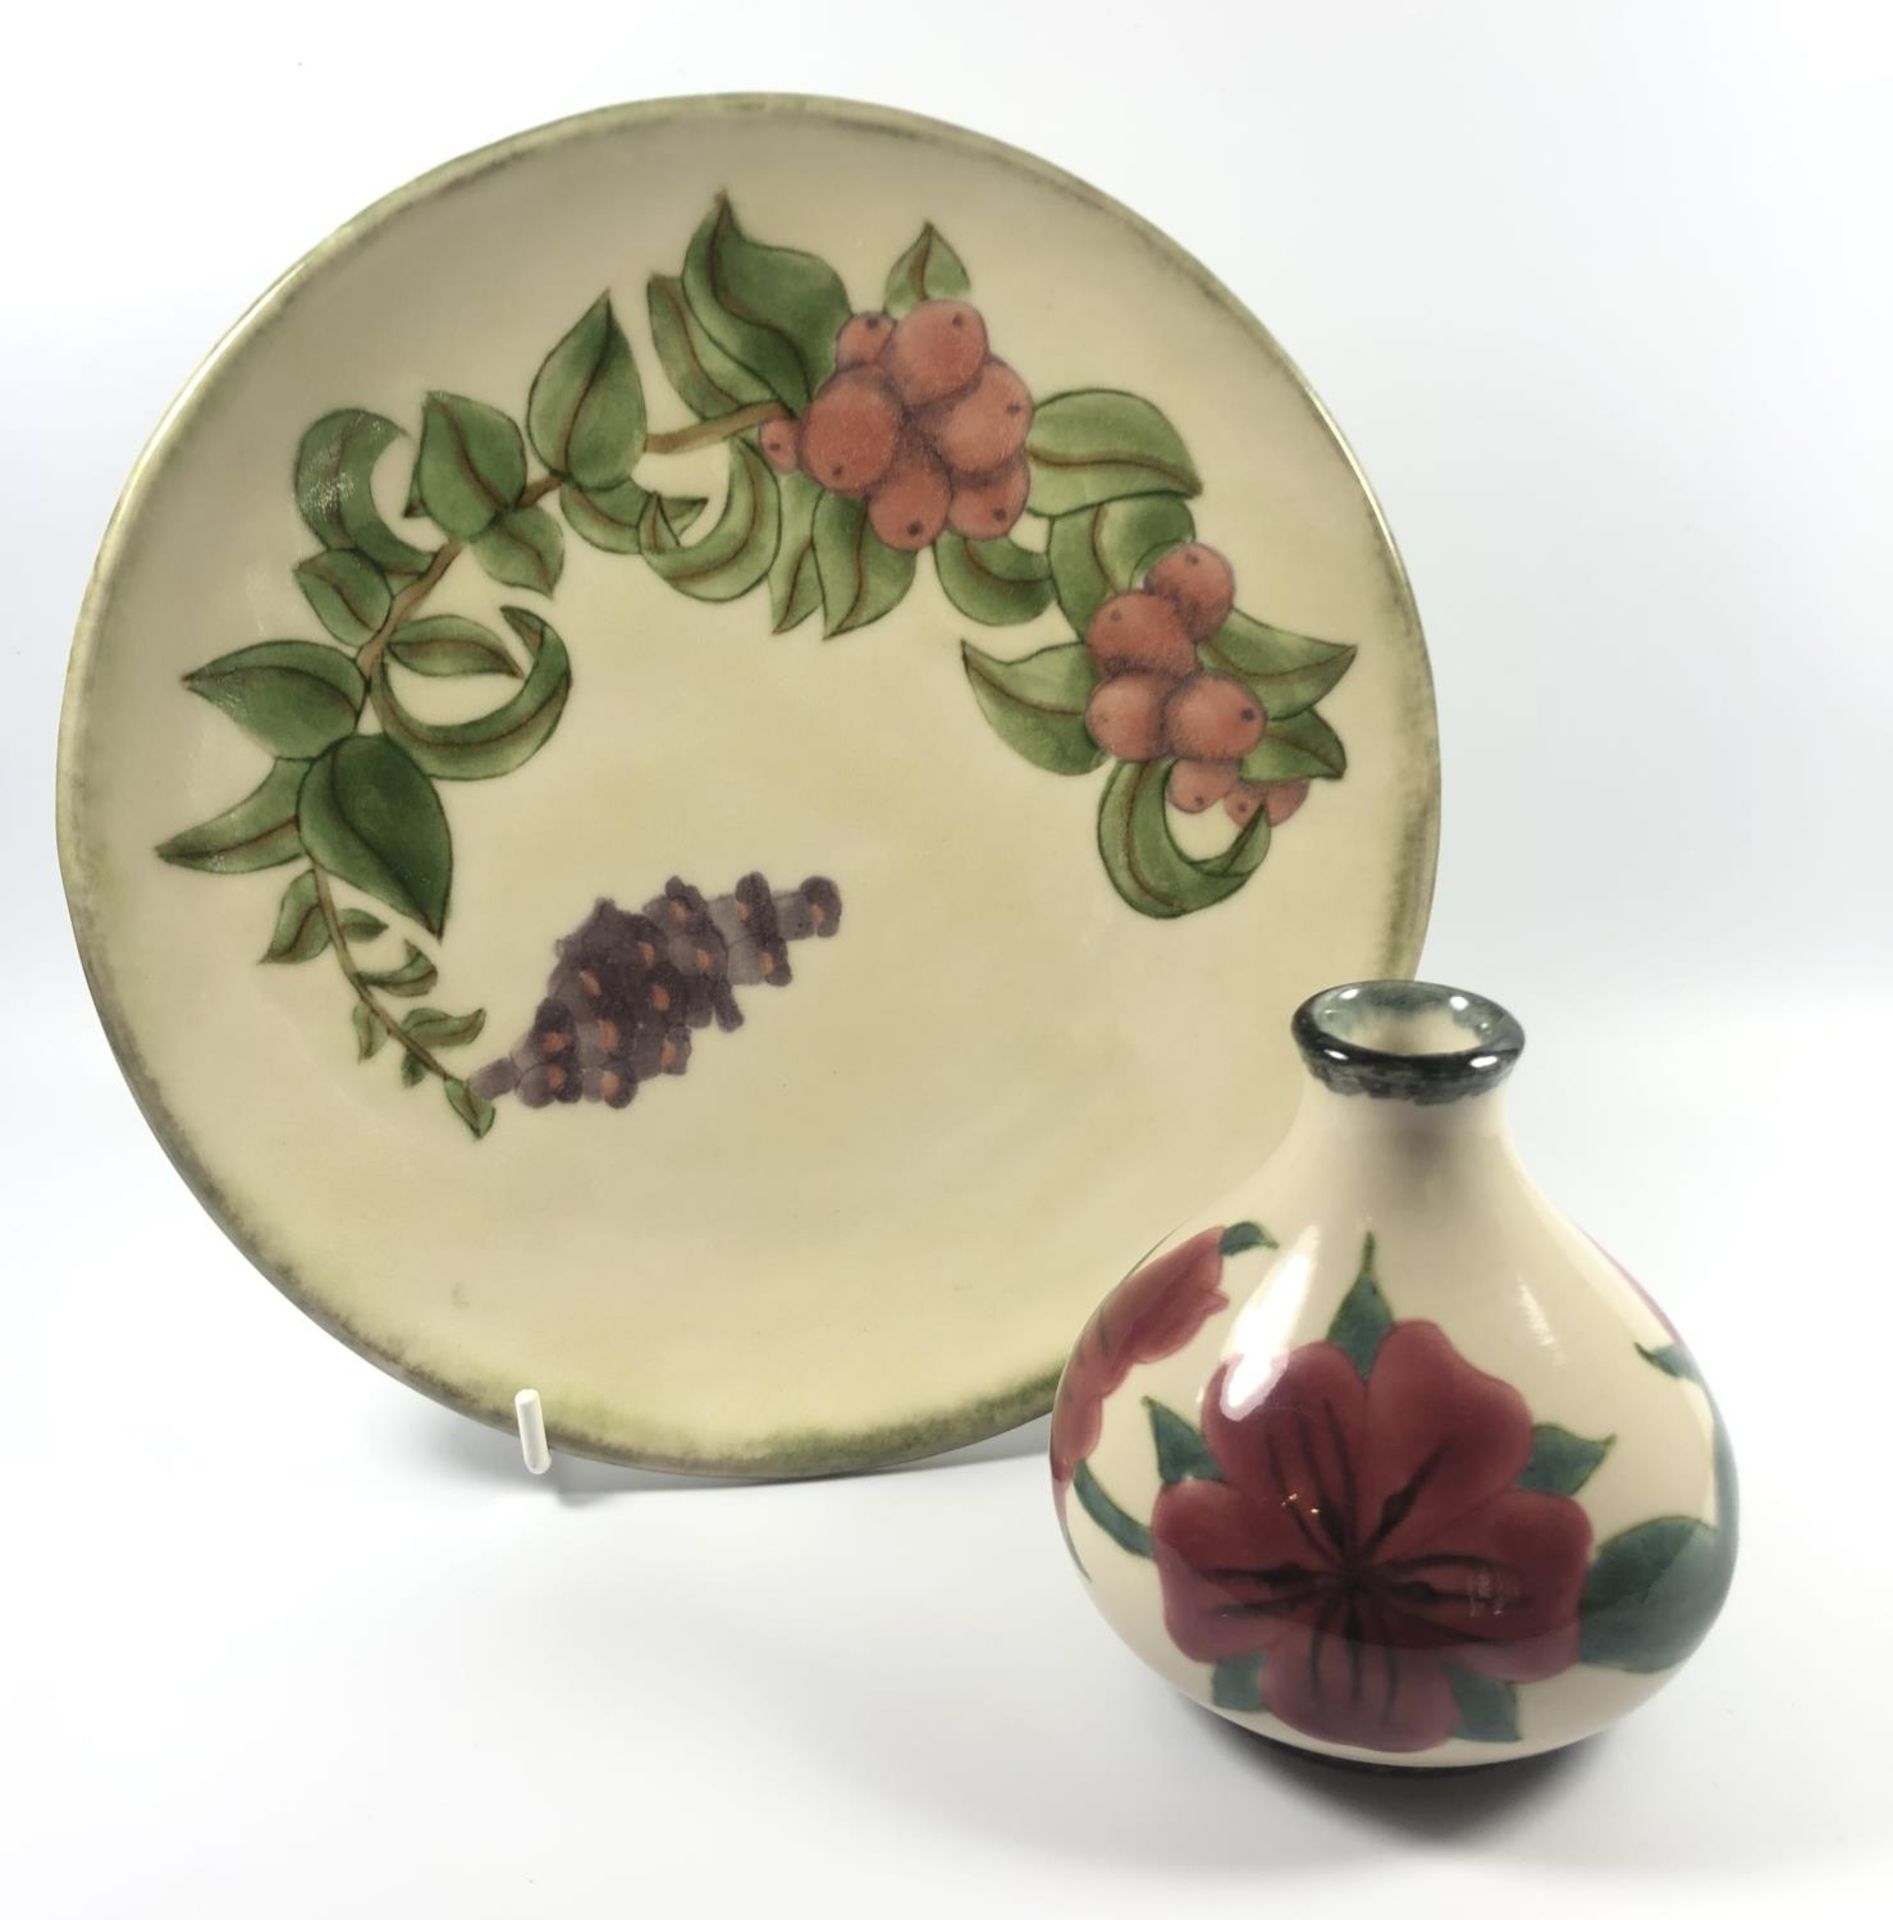 TWO PIECES OF COBRIDGE POTTERY - A PLATE AND SQUAT VASE IN THE BERRY AND PLUM PATTERN, HEIGHT OF